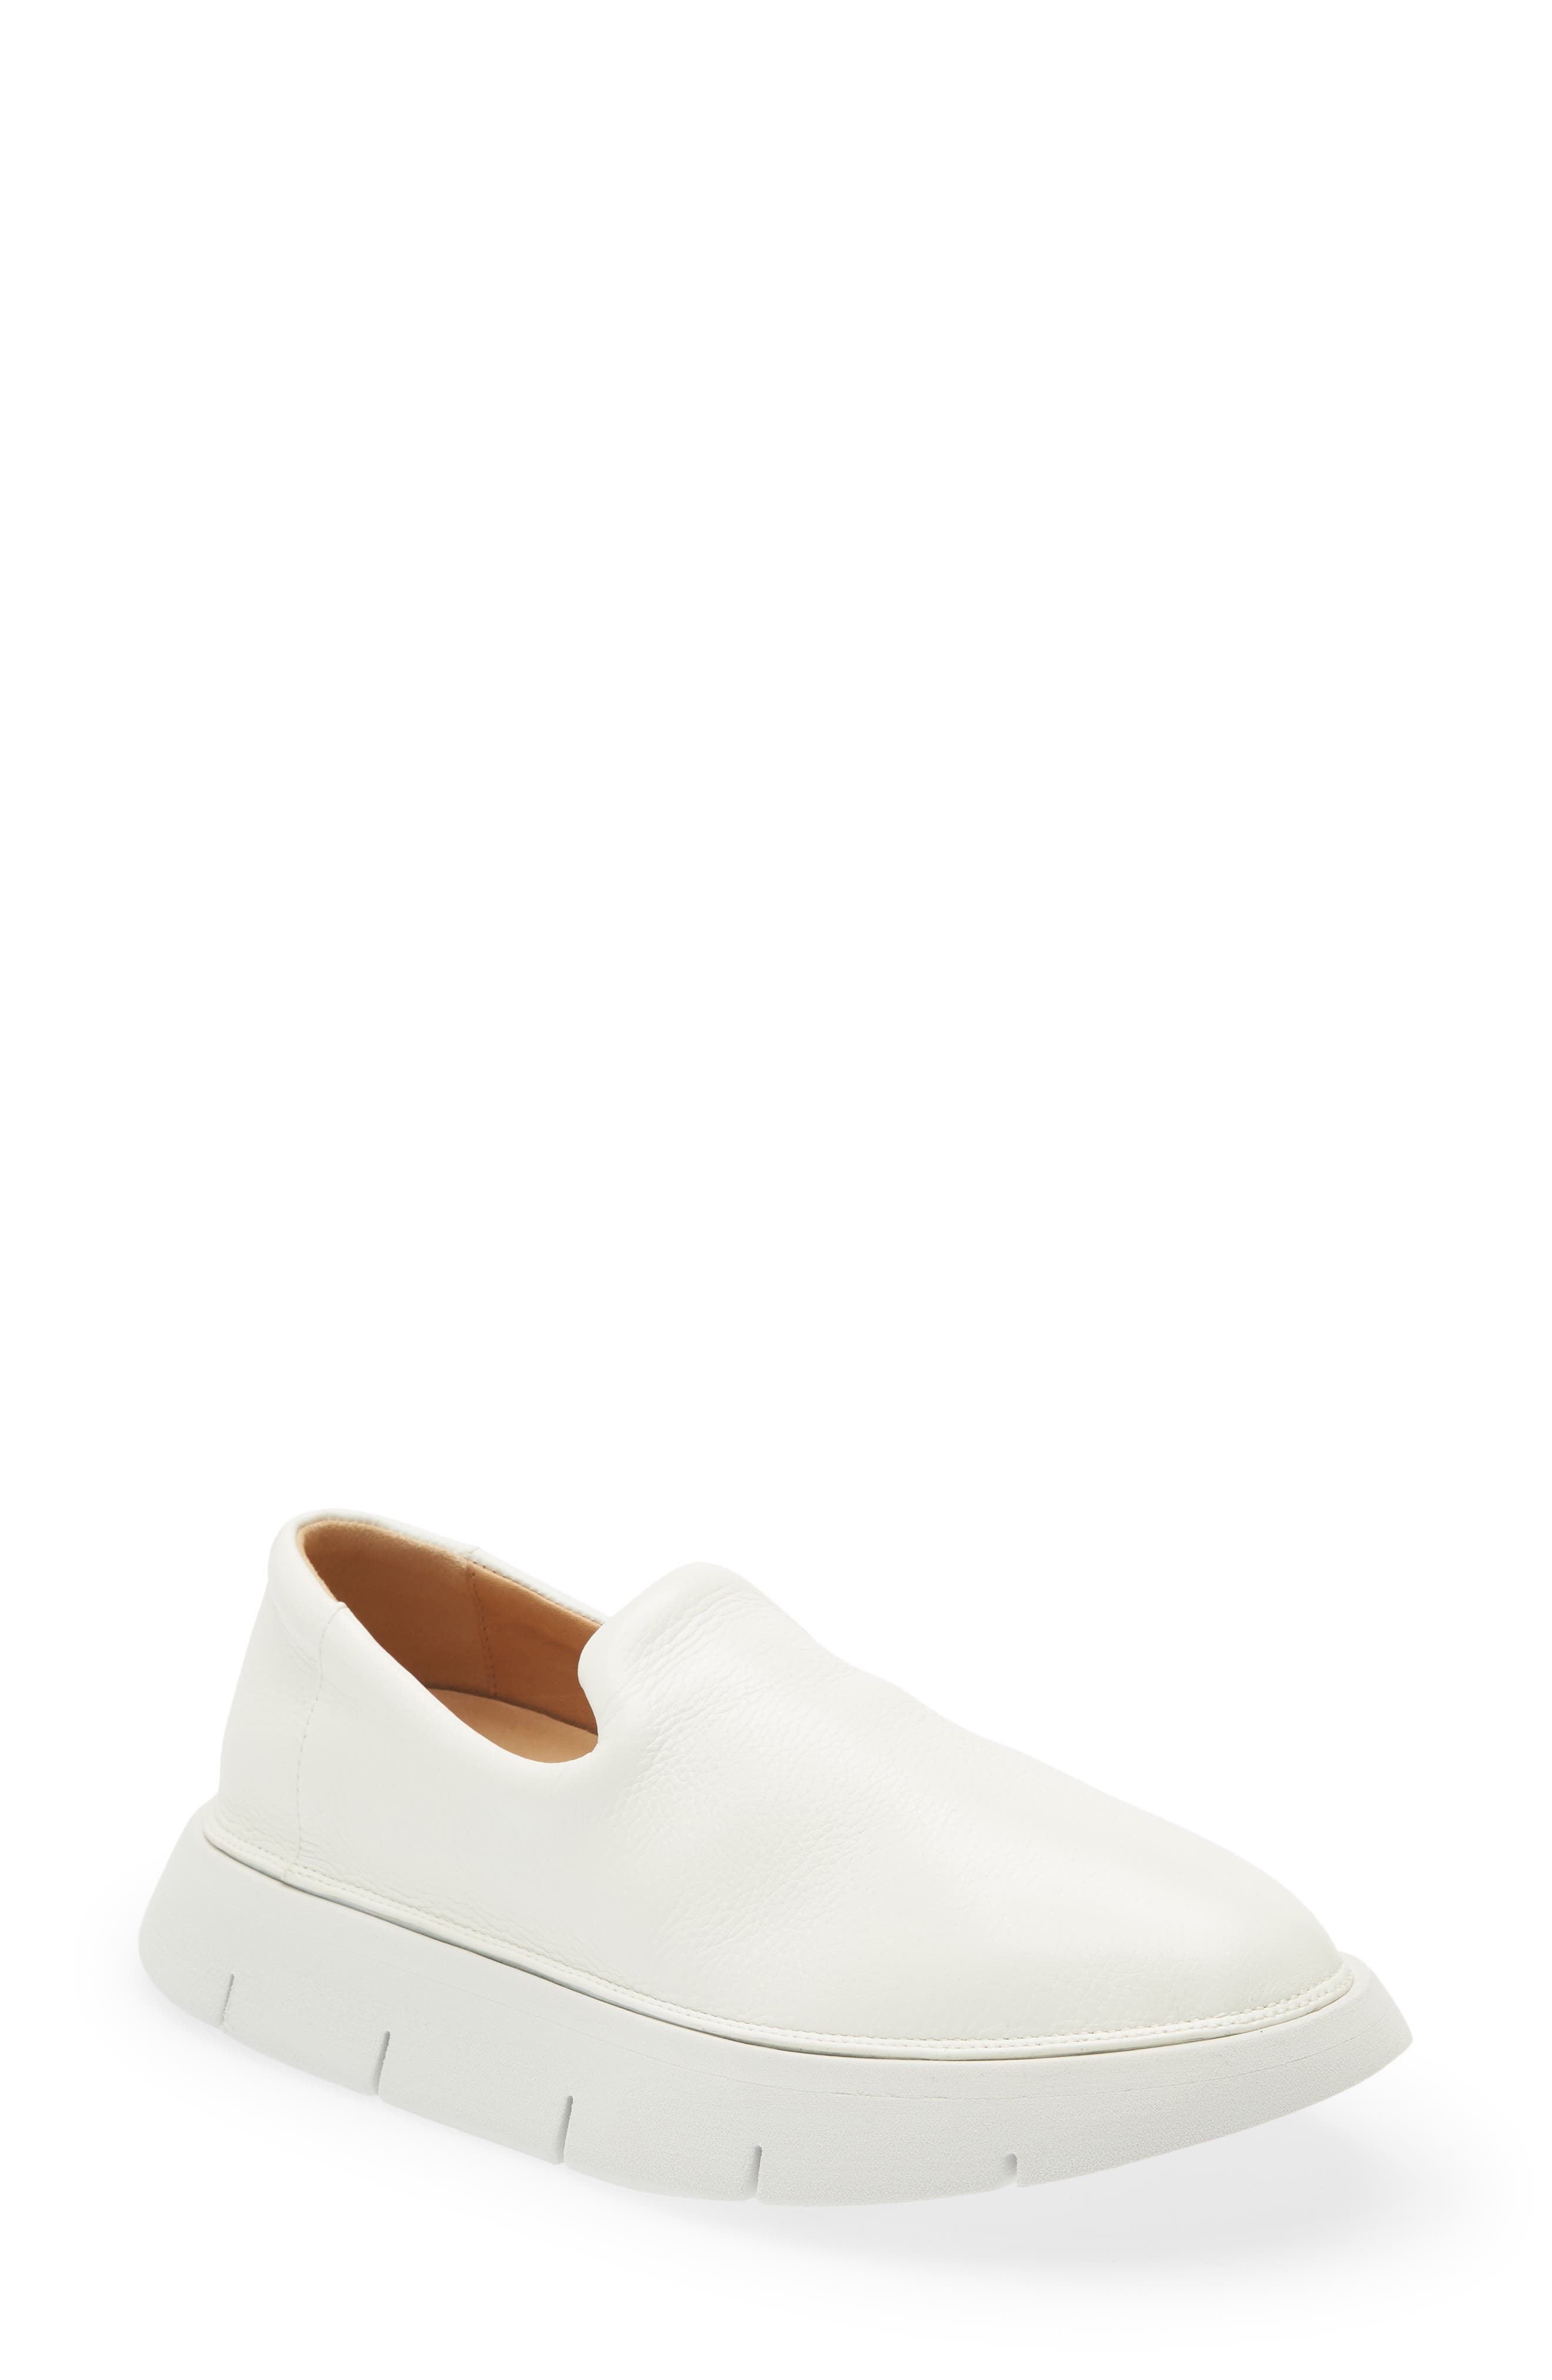 Mens Slip-on shoes Marsèll Slip-on shoes Marsèll Leather White Intagliata Loafers in Black for Men 